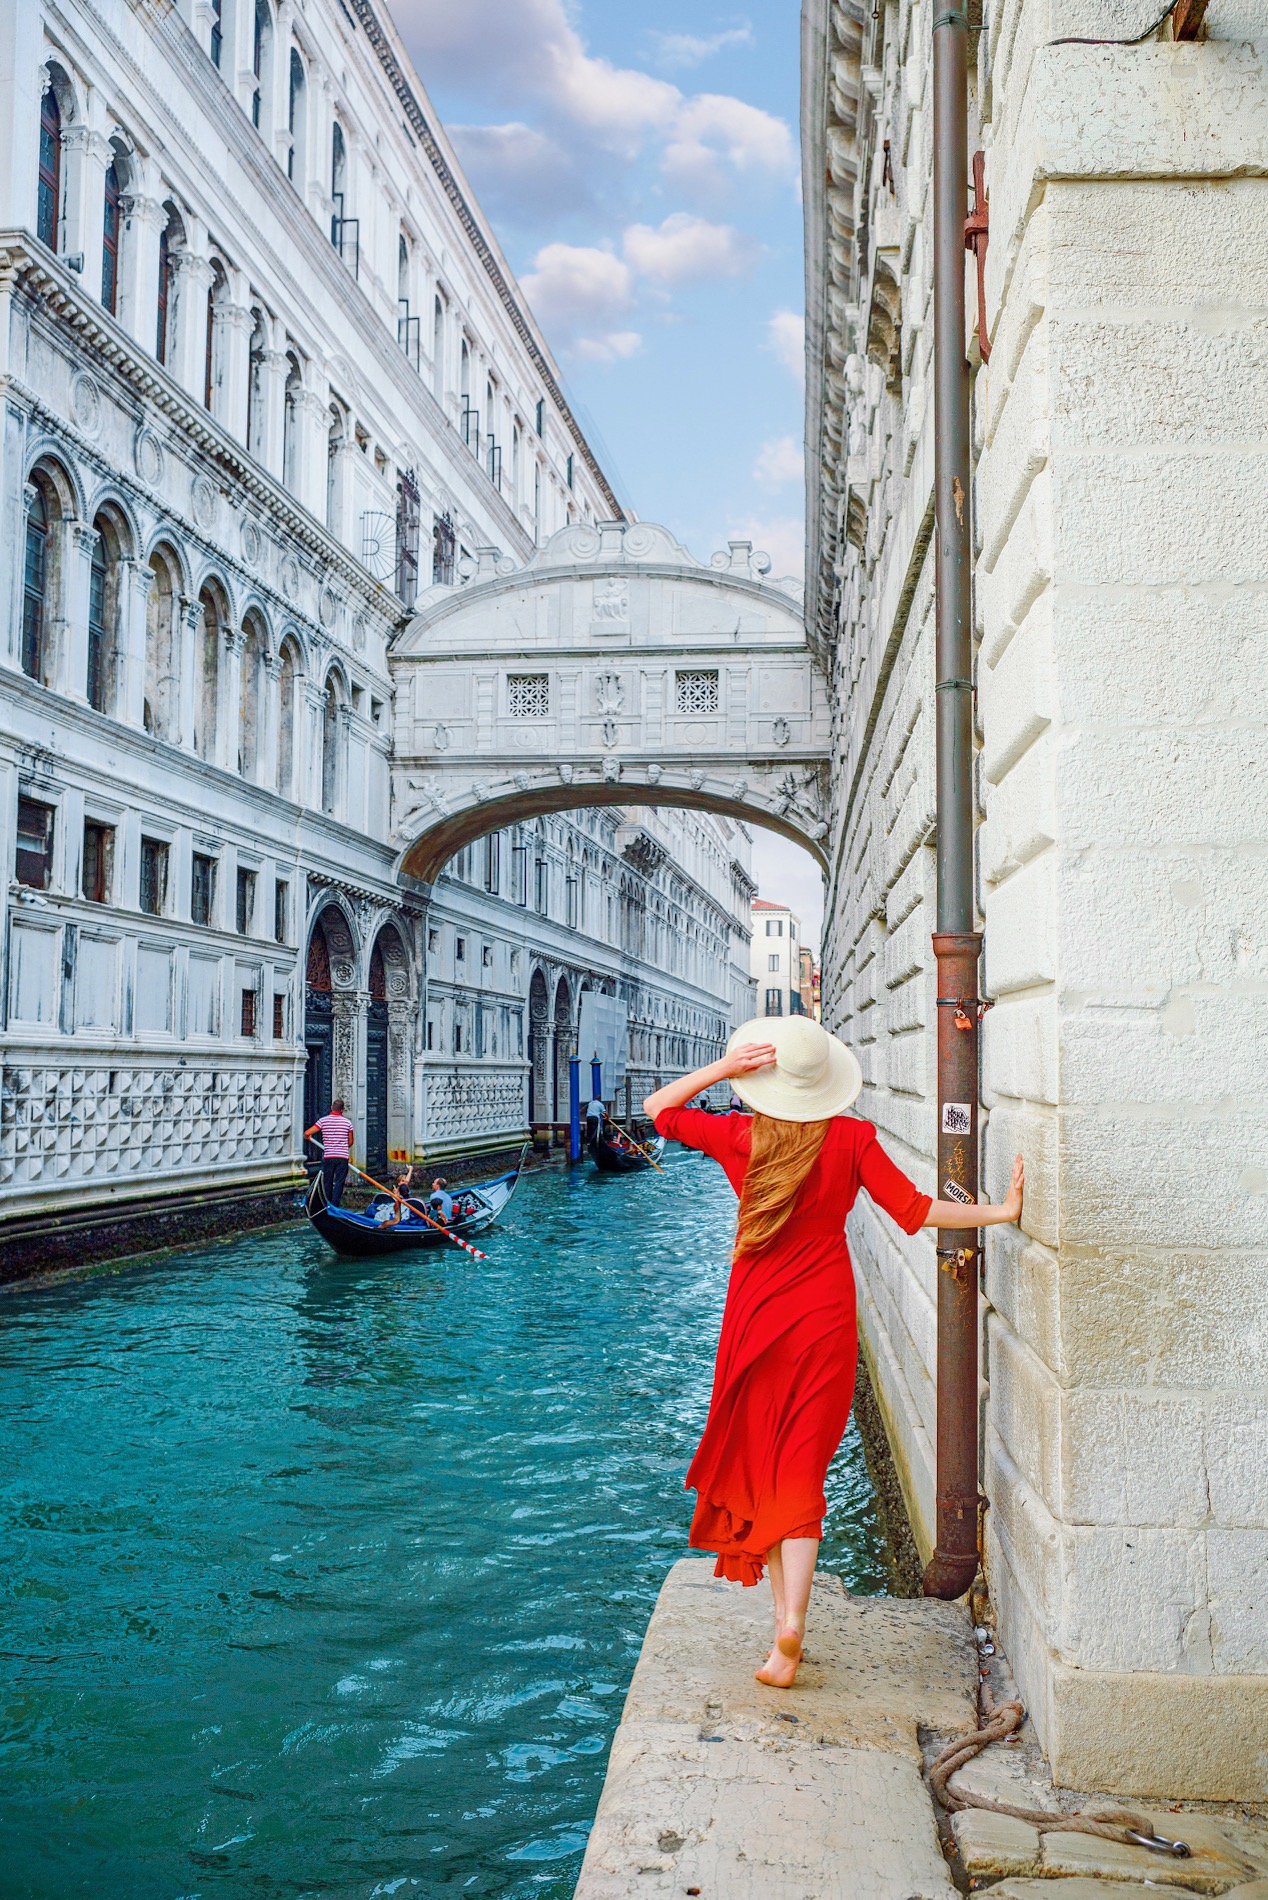 Woman in a red dress and hat stands looking at the Bridge of Sighs over a canal.